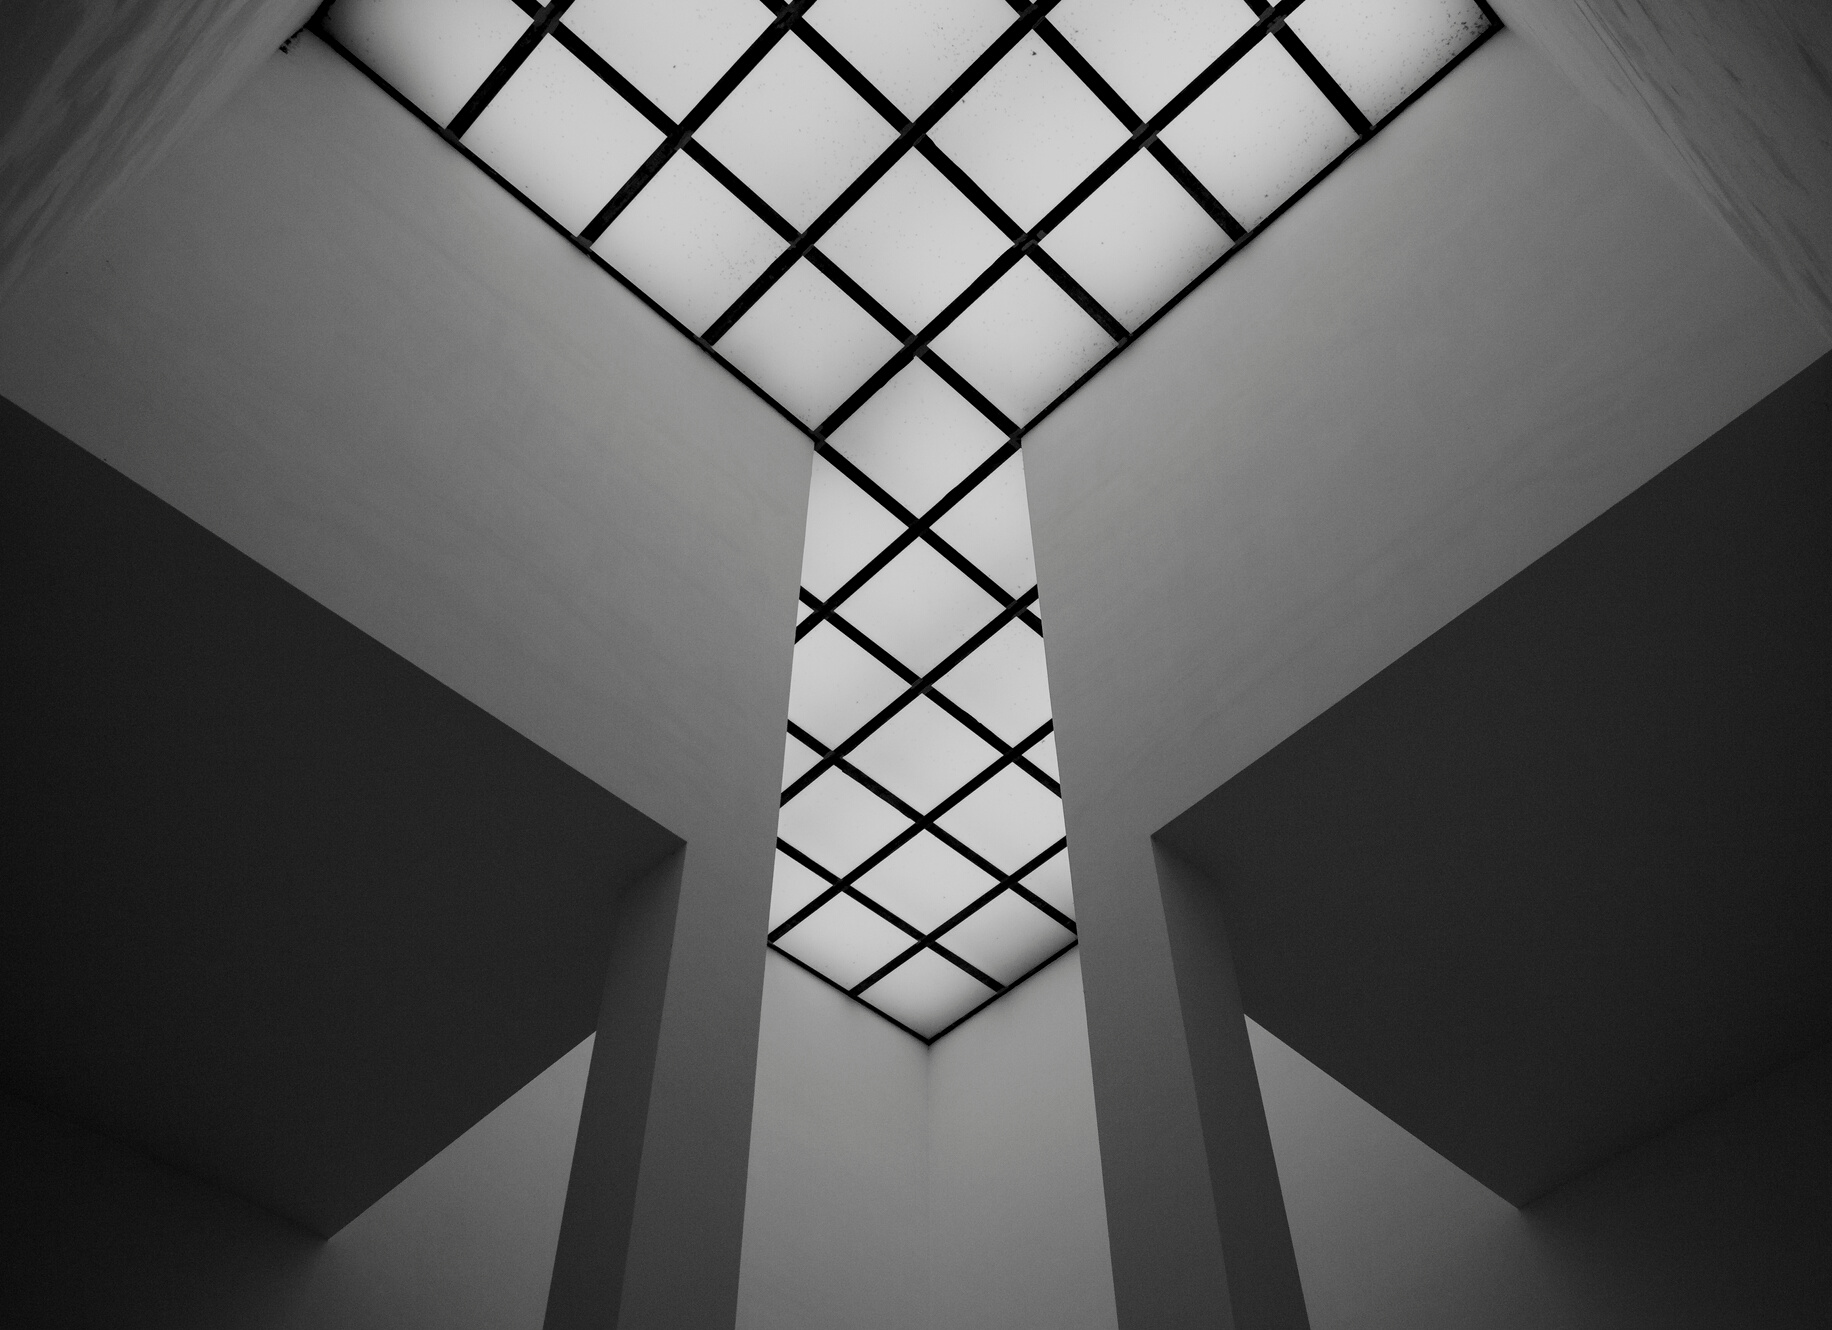 Modern Architectural Design of Ceiling